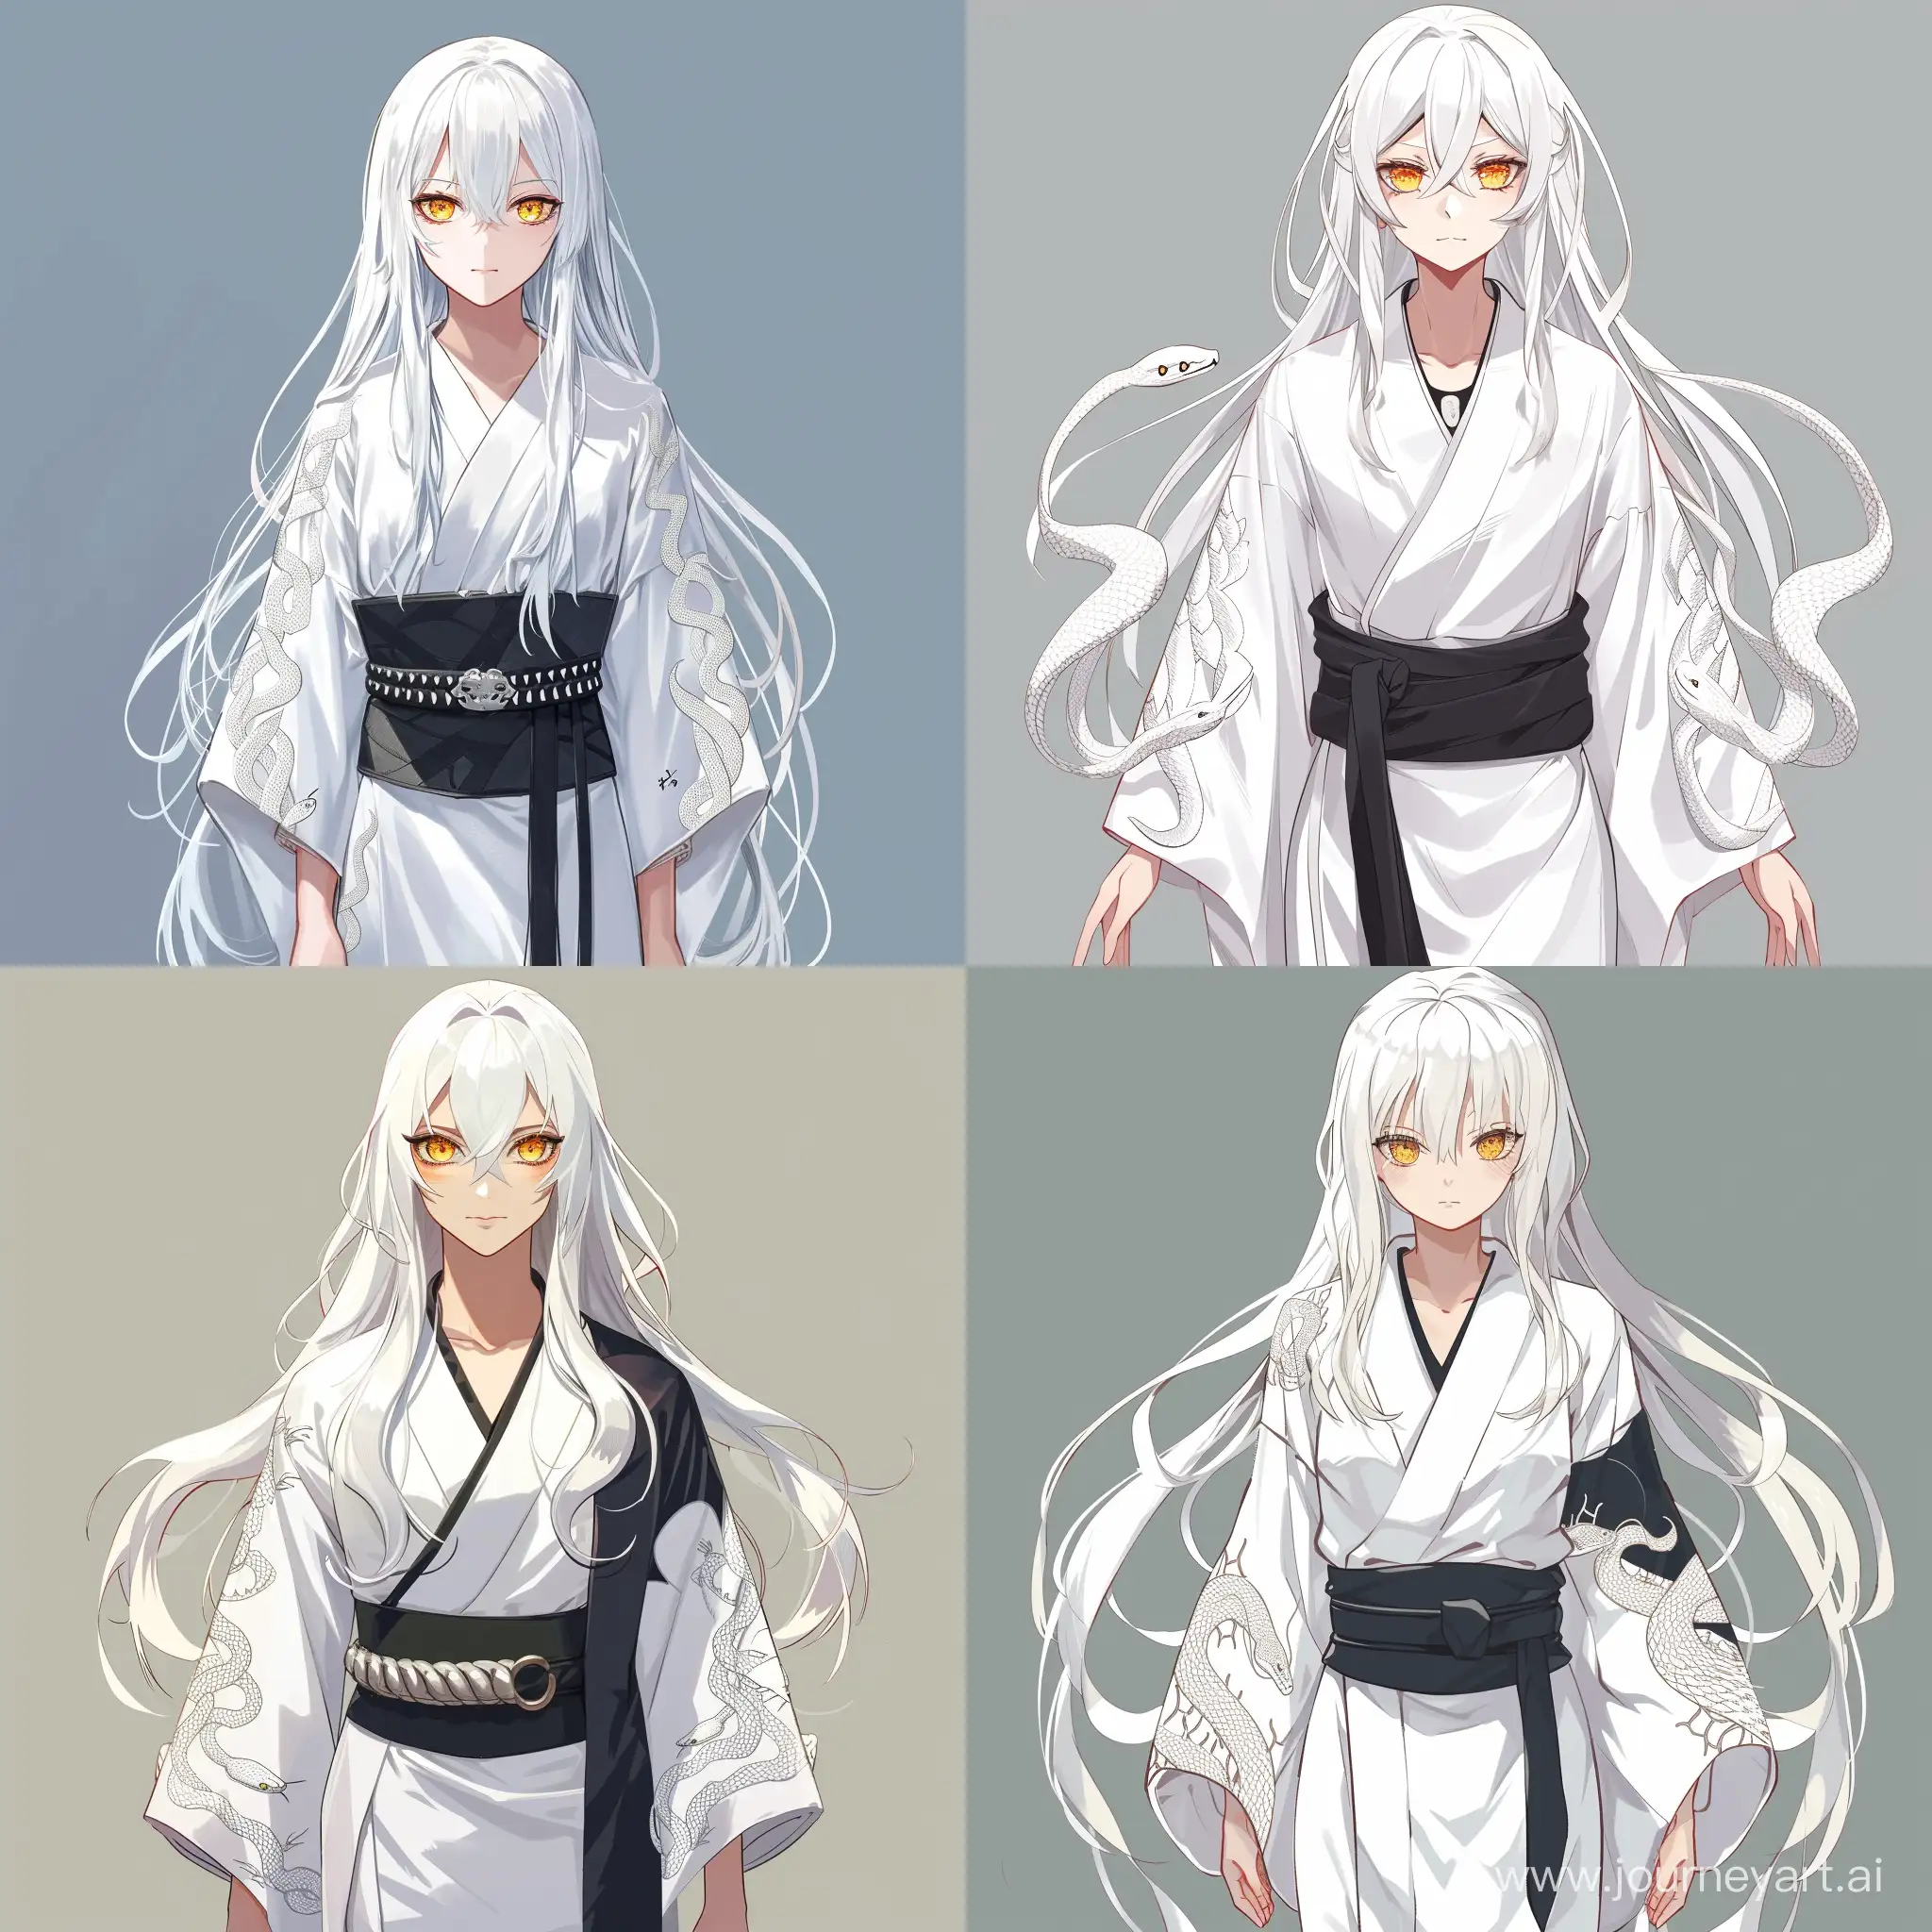 Ethereal-WhiteHaired-Girl-in-Traditional-Japanese-Attire-with-Snake-Scale-Accents